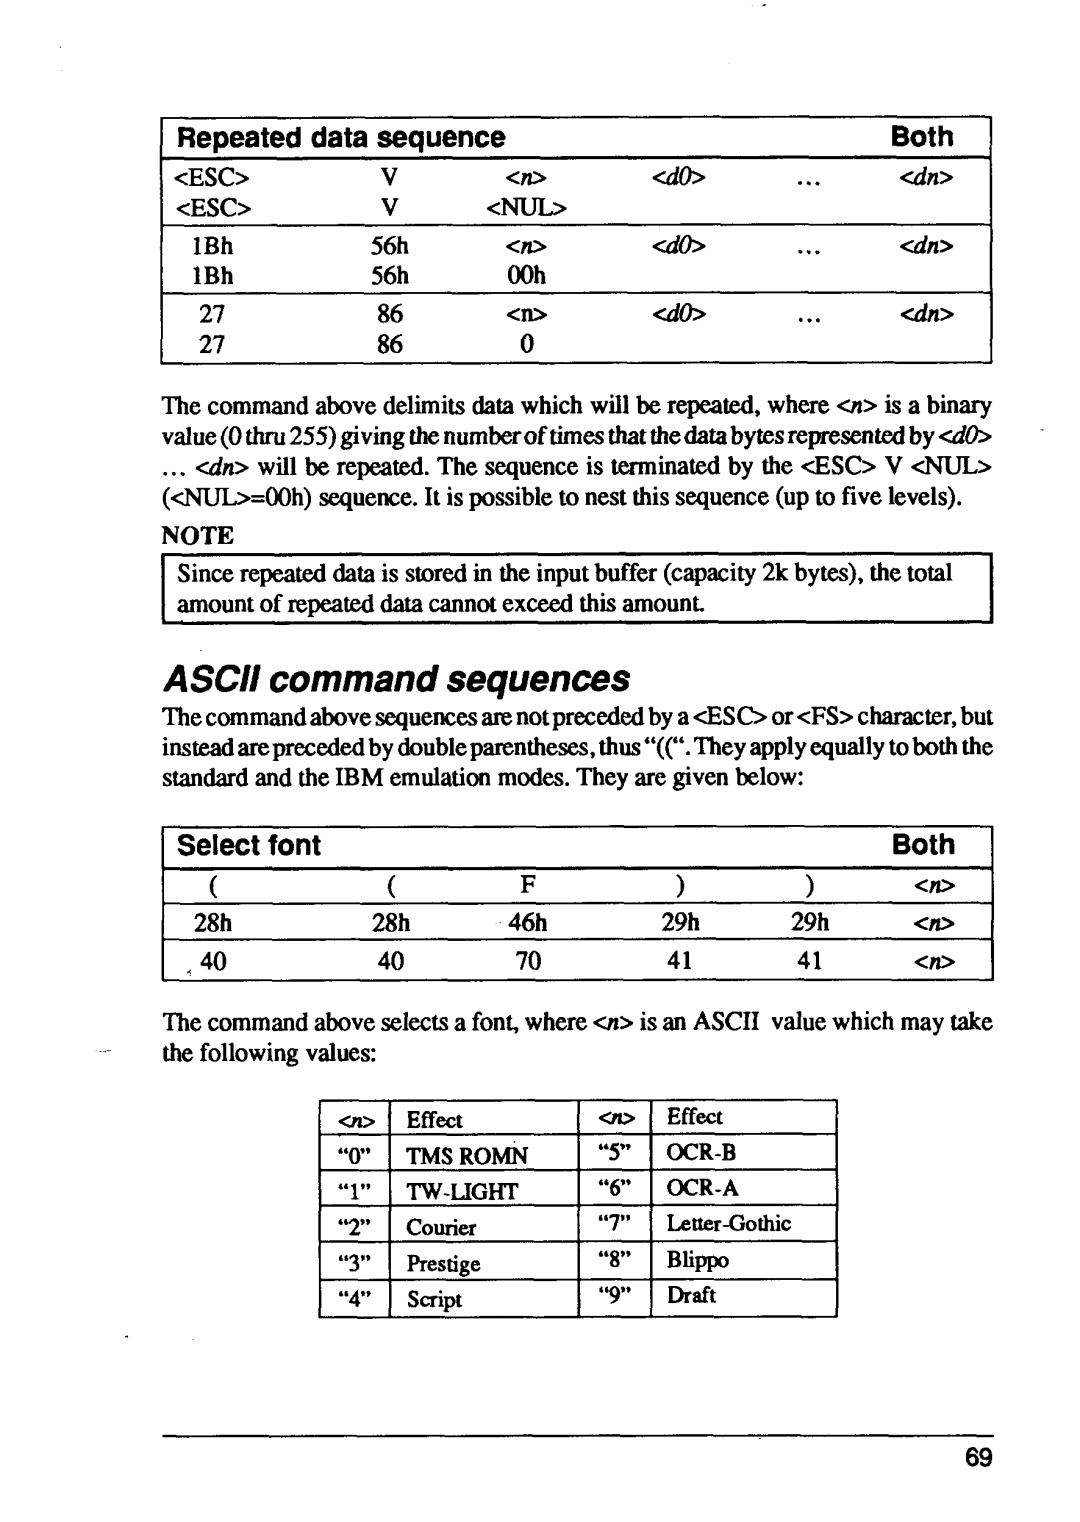 Star Micronics XB24-15, XB24-10 user manual ASCII command sequences, Repeated data sequence, Both, Select font 